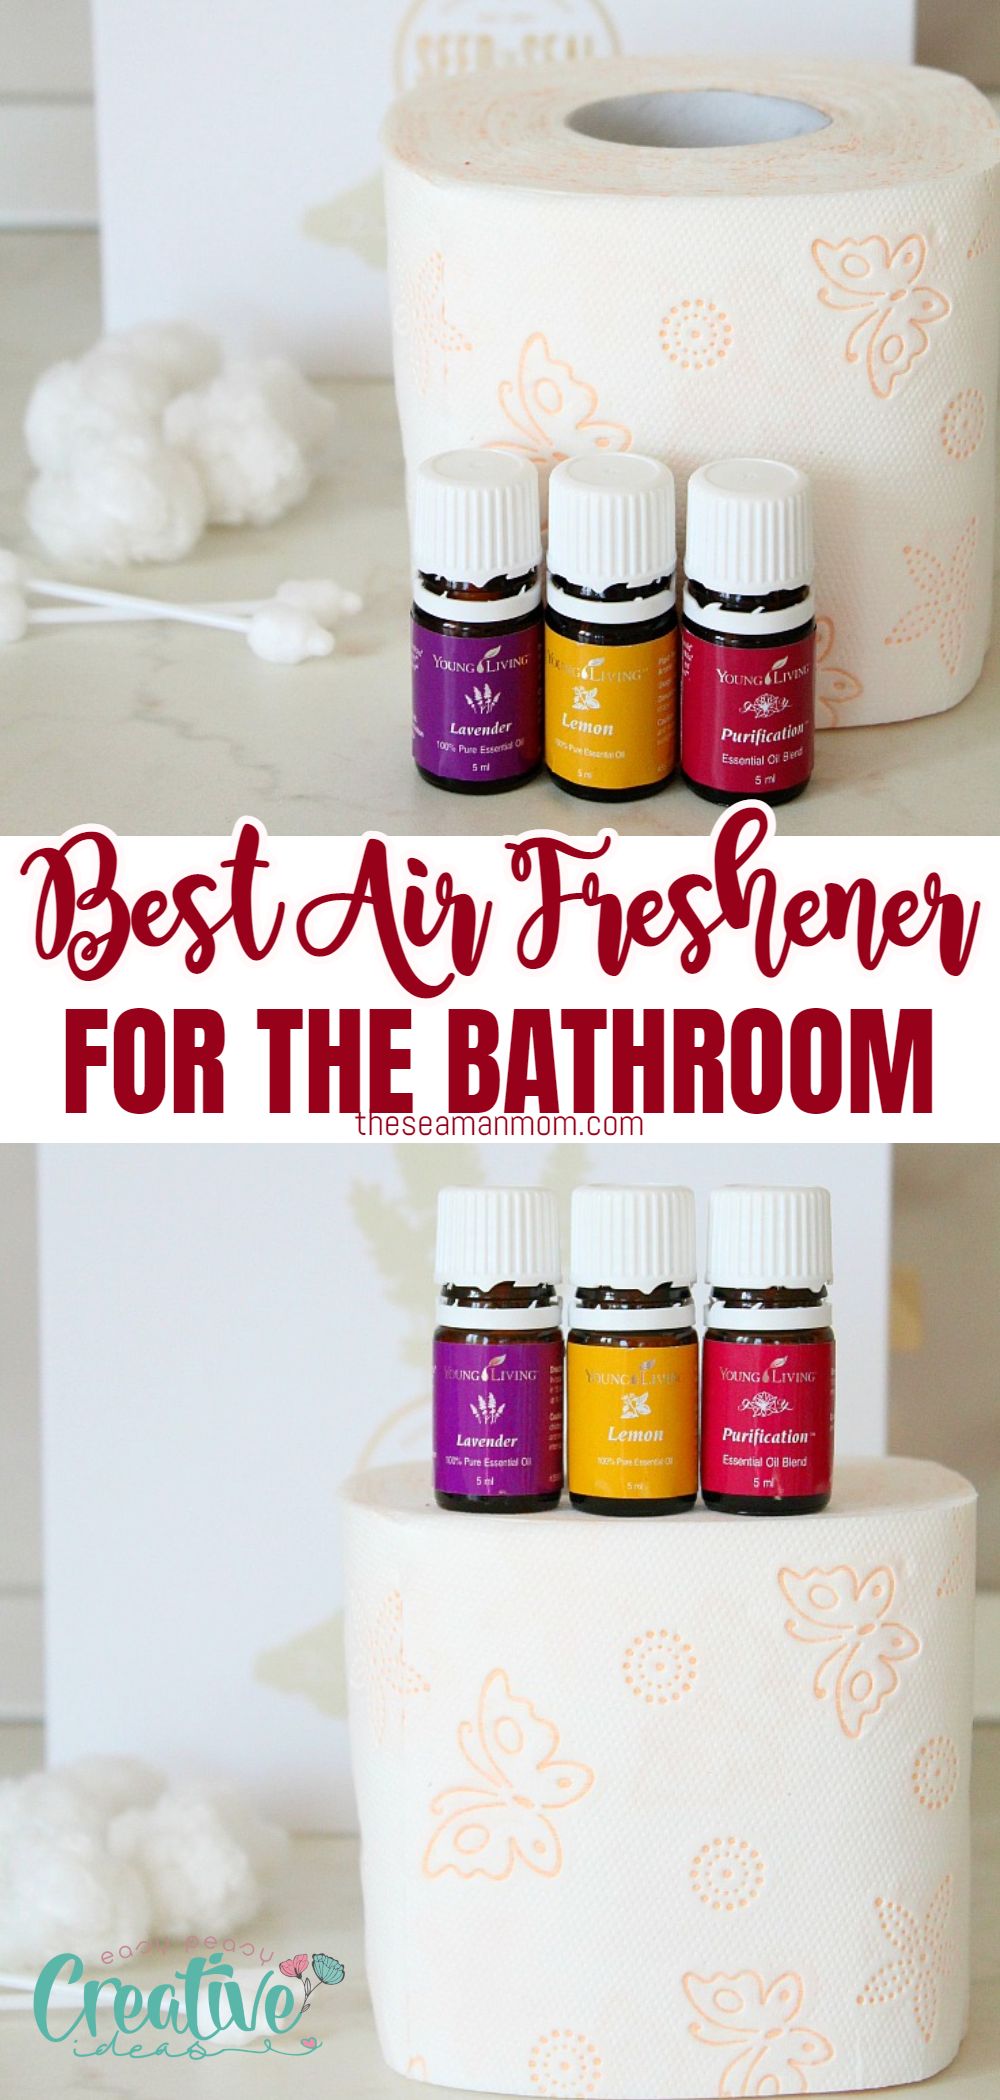 Looking for a way to keep your bathroom smelling nice all the time? Look no further than this tutorial on how to make the best air freshener for bathroom! This DIY air freshener is easy to make and will leave your bathroom smelling fresh and clean. via @petroneagu